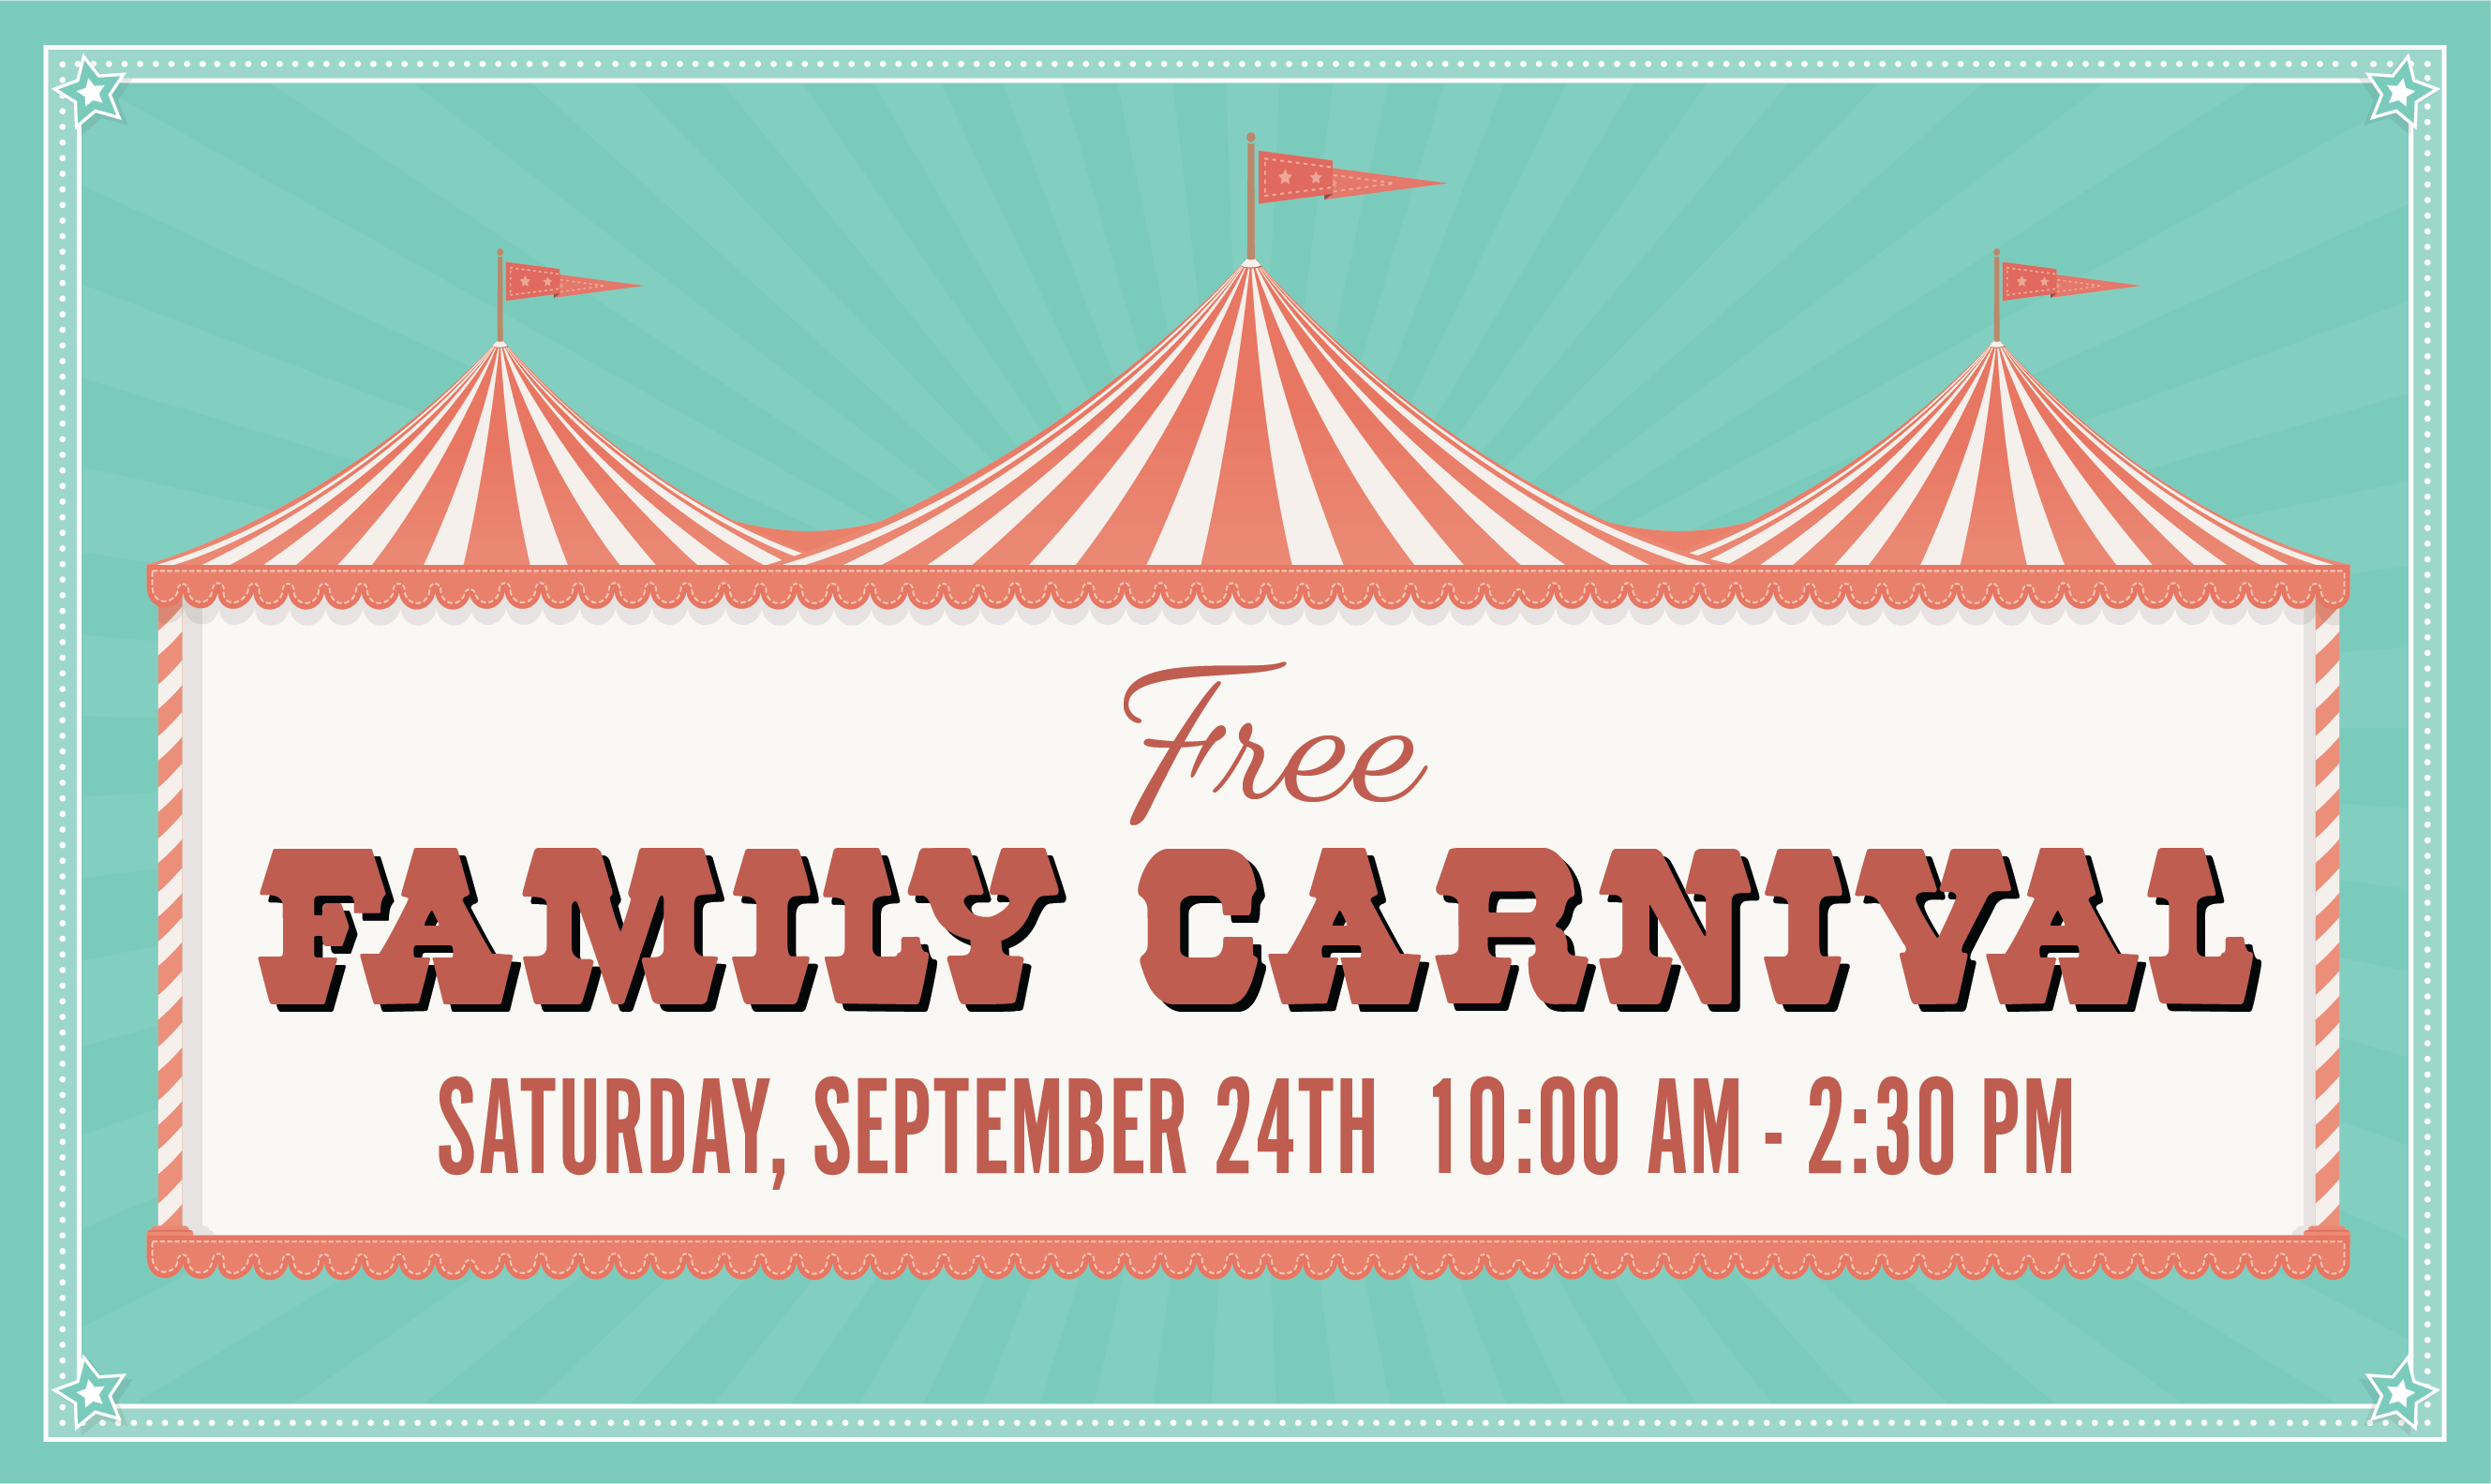 Free Family Carnival Saturday September 24th 10:00 AM to 2:30 PM on Carnival background